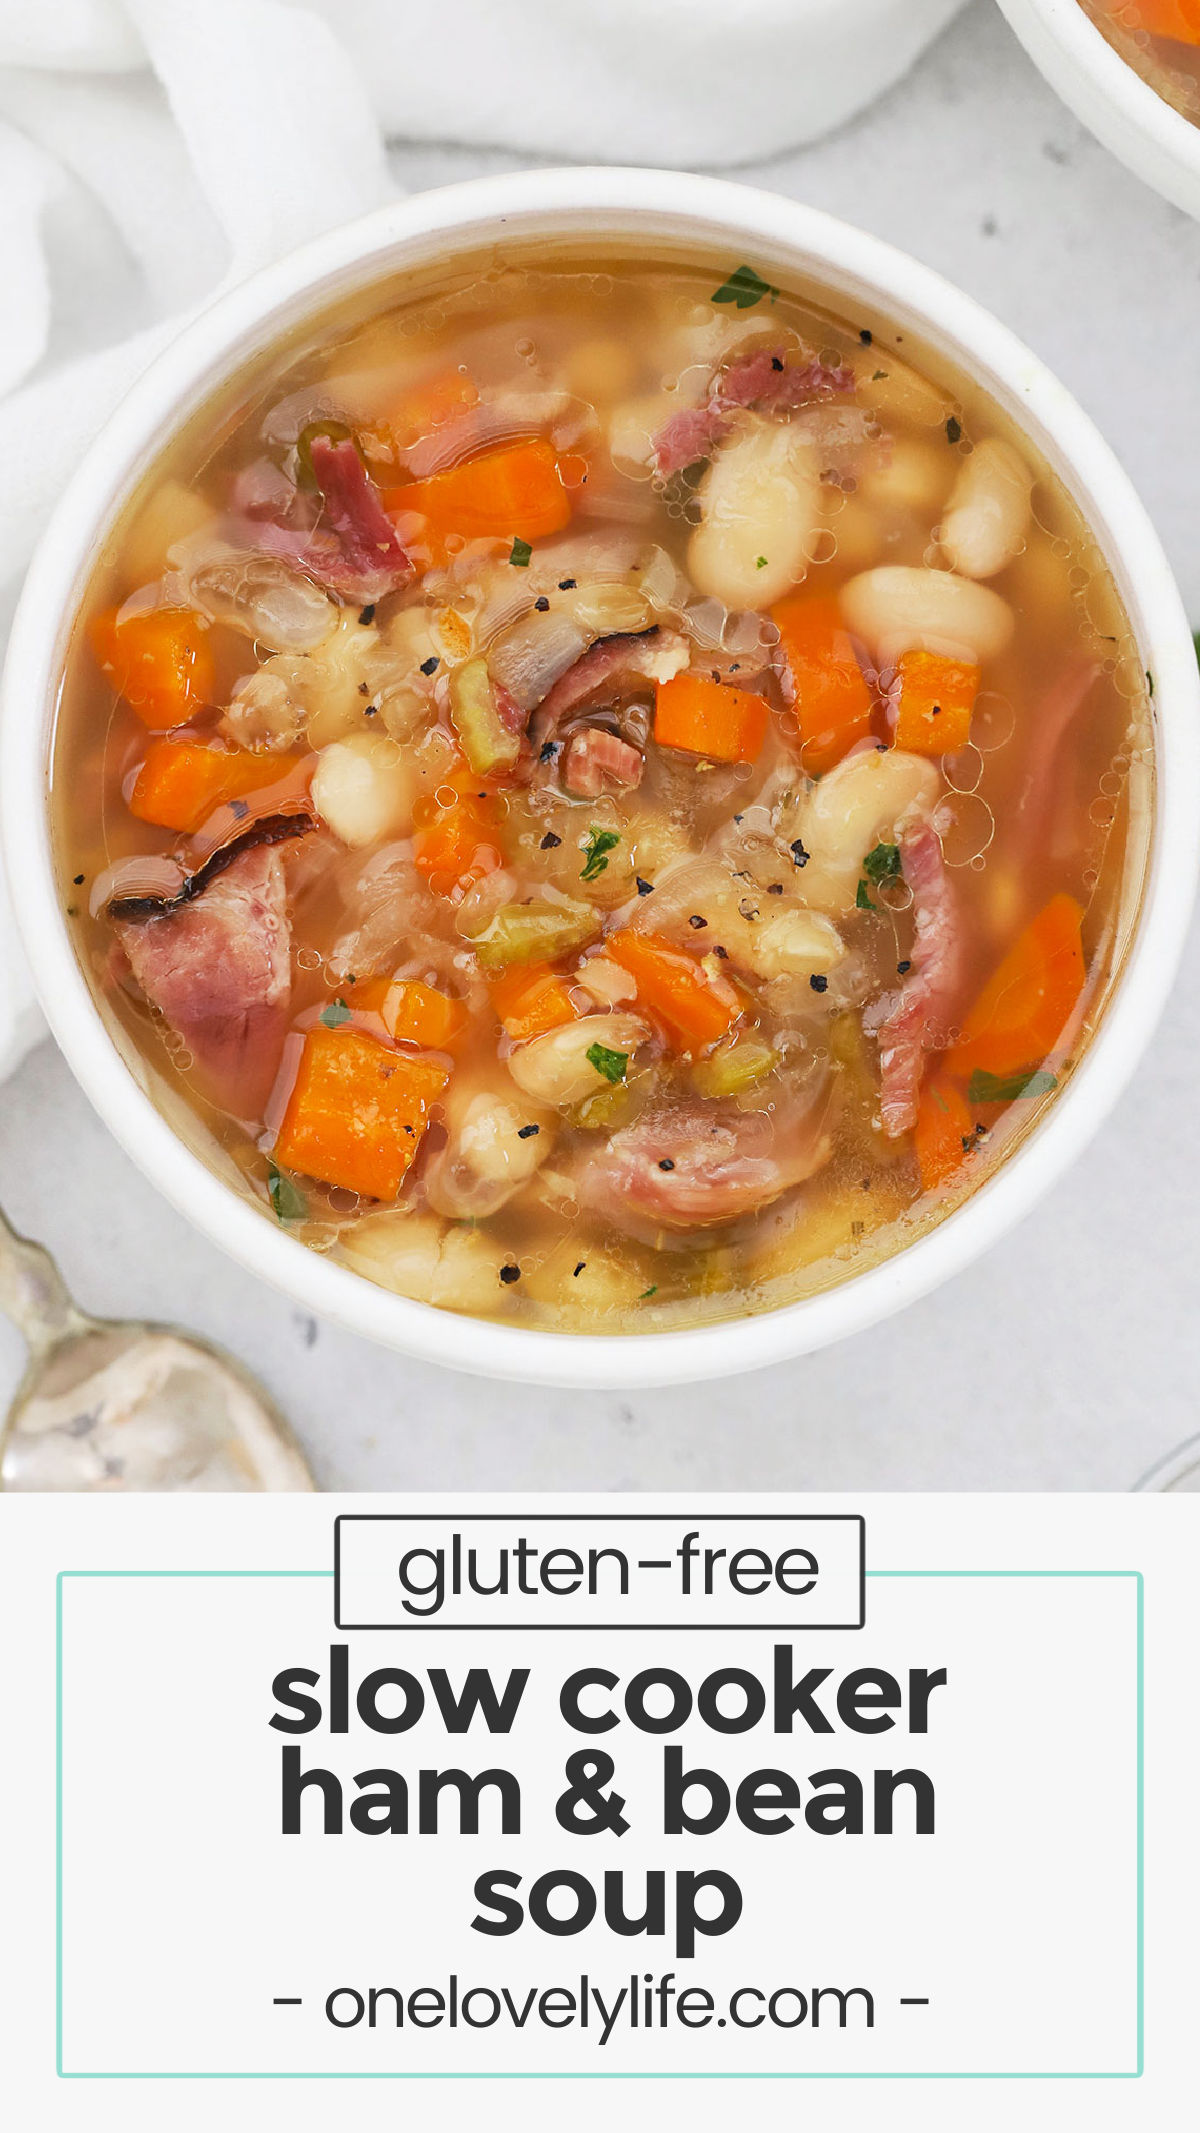 Slow Cooker Ham And Bean Soup - This cozy crock pot ham bean soup is the perfect way to use up leftover ham from the holidays! You'll love the flavor. // ham leftovers // healthy slow cooker soup // healthy crock pot soup // gluten free slow cooker soup / gluten free crock pot soup / ideas for leftover ham /